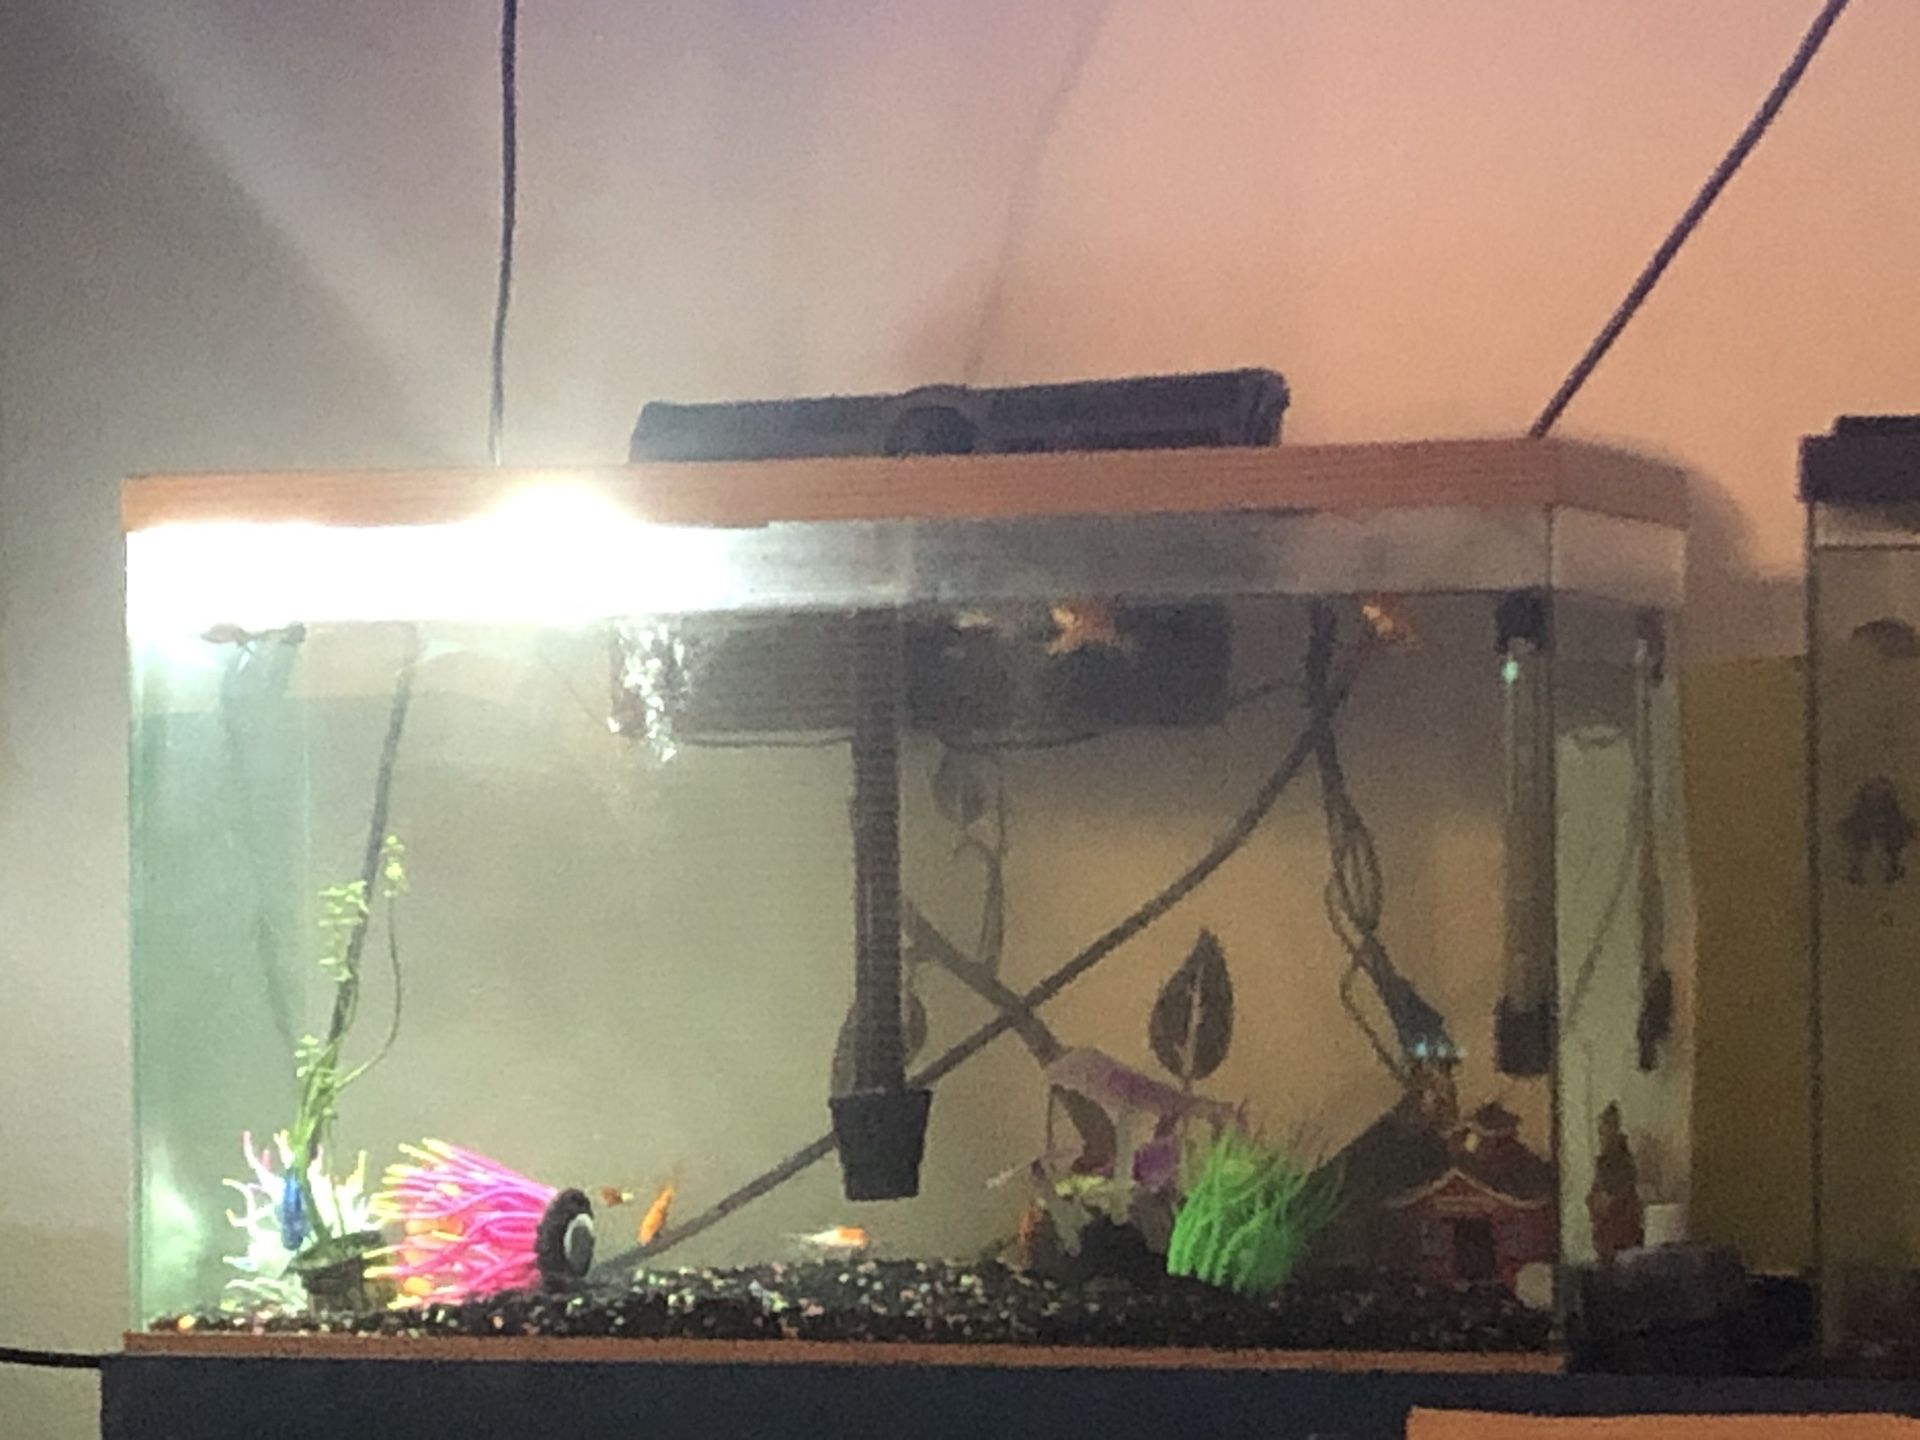 Fish tank with accessories